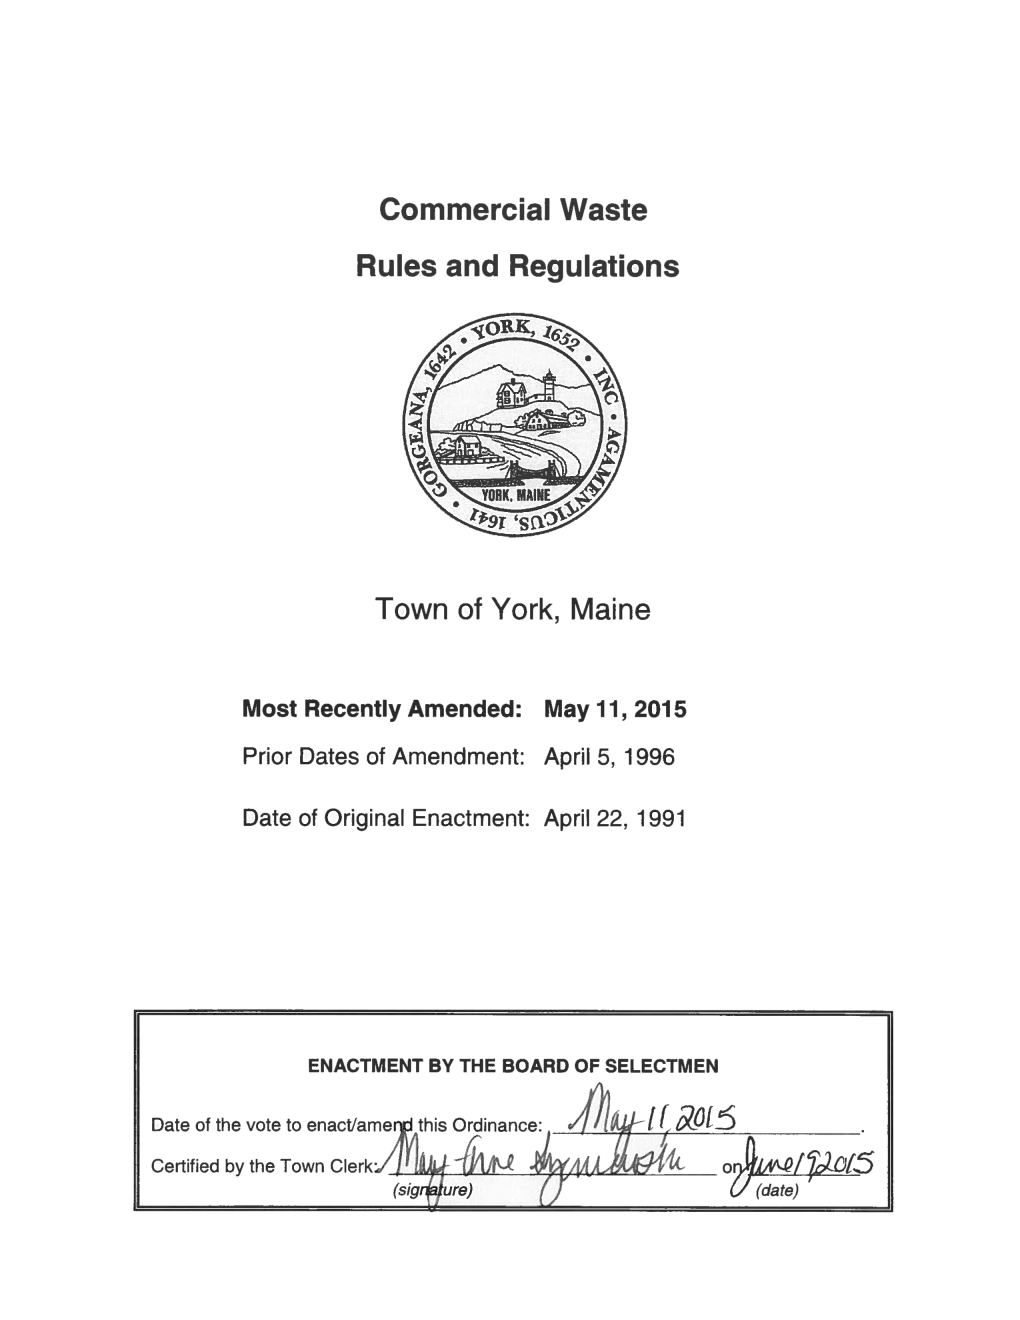 Commercial Waste Rules and Regulations (PDF)